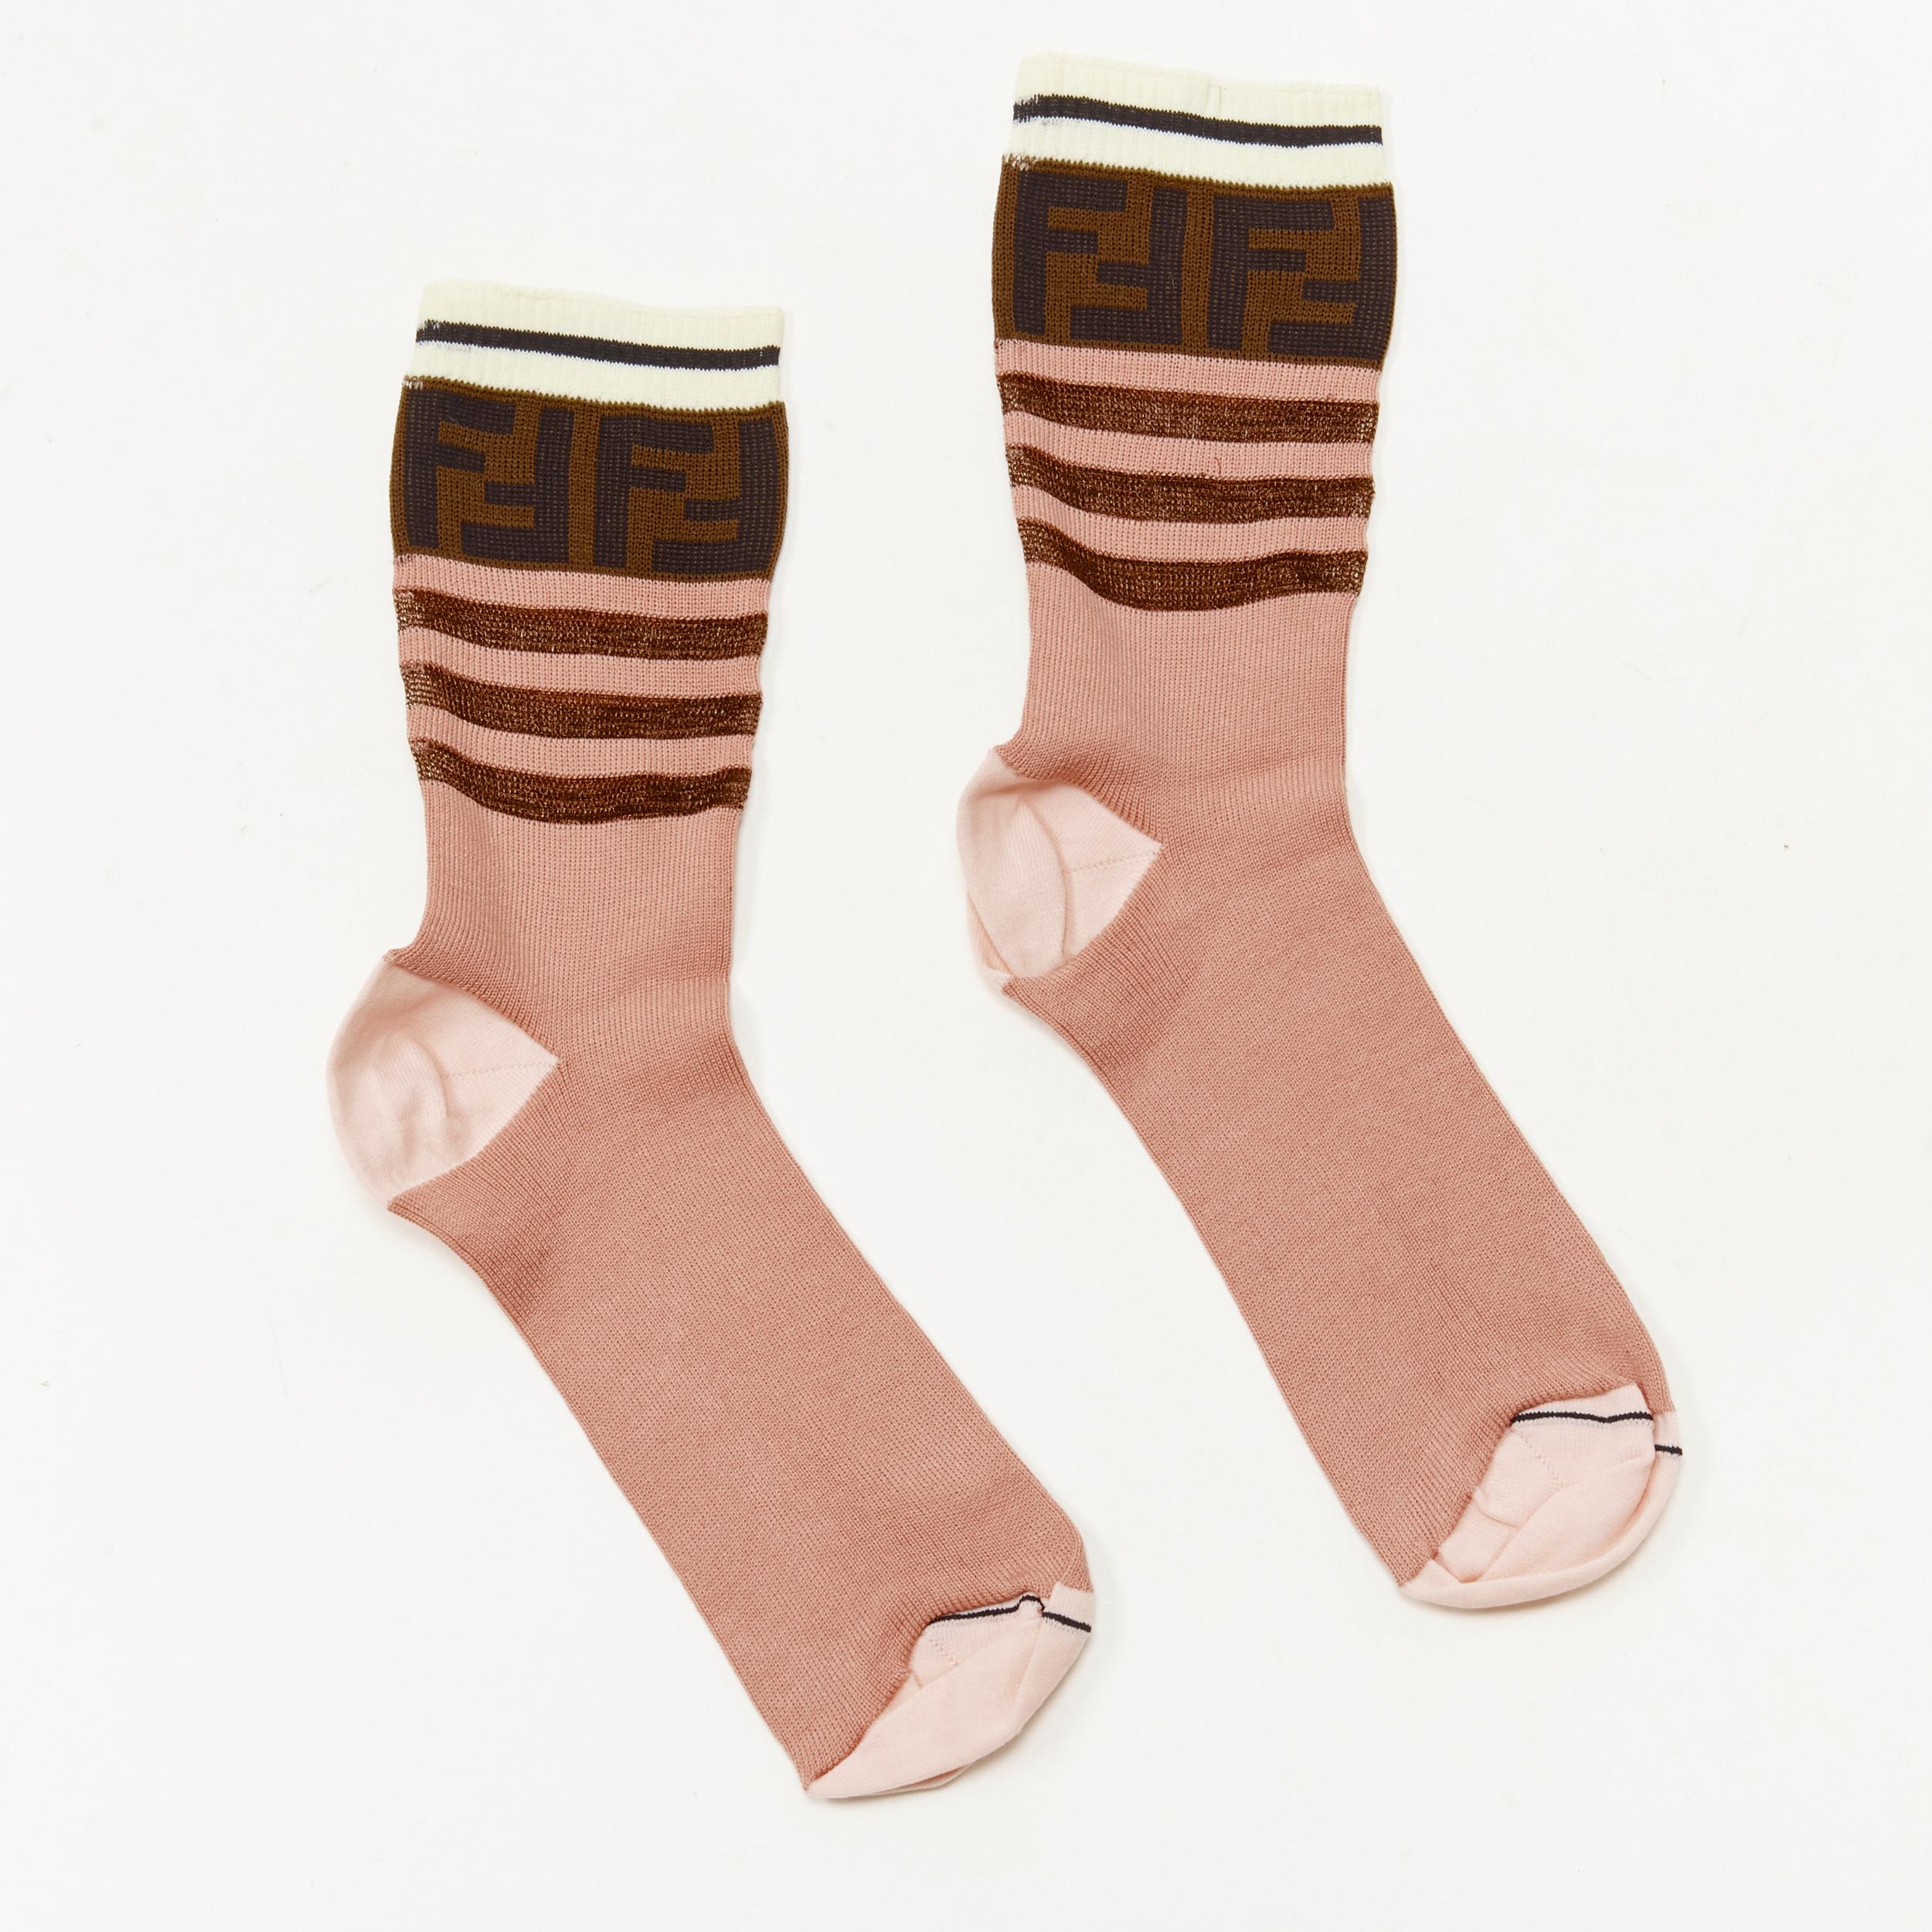 FENDI brown FF Zucca monogram pink striped socks
Brand: Fendi
Color: Pink
Pattern: Solid

CONDITION:
Condition: Excellent, this item was pre-owned and is in excellent condition. 

This Fendi item is authentic. 